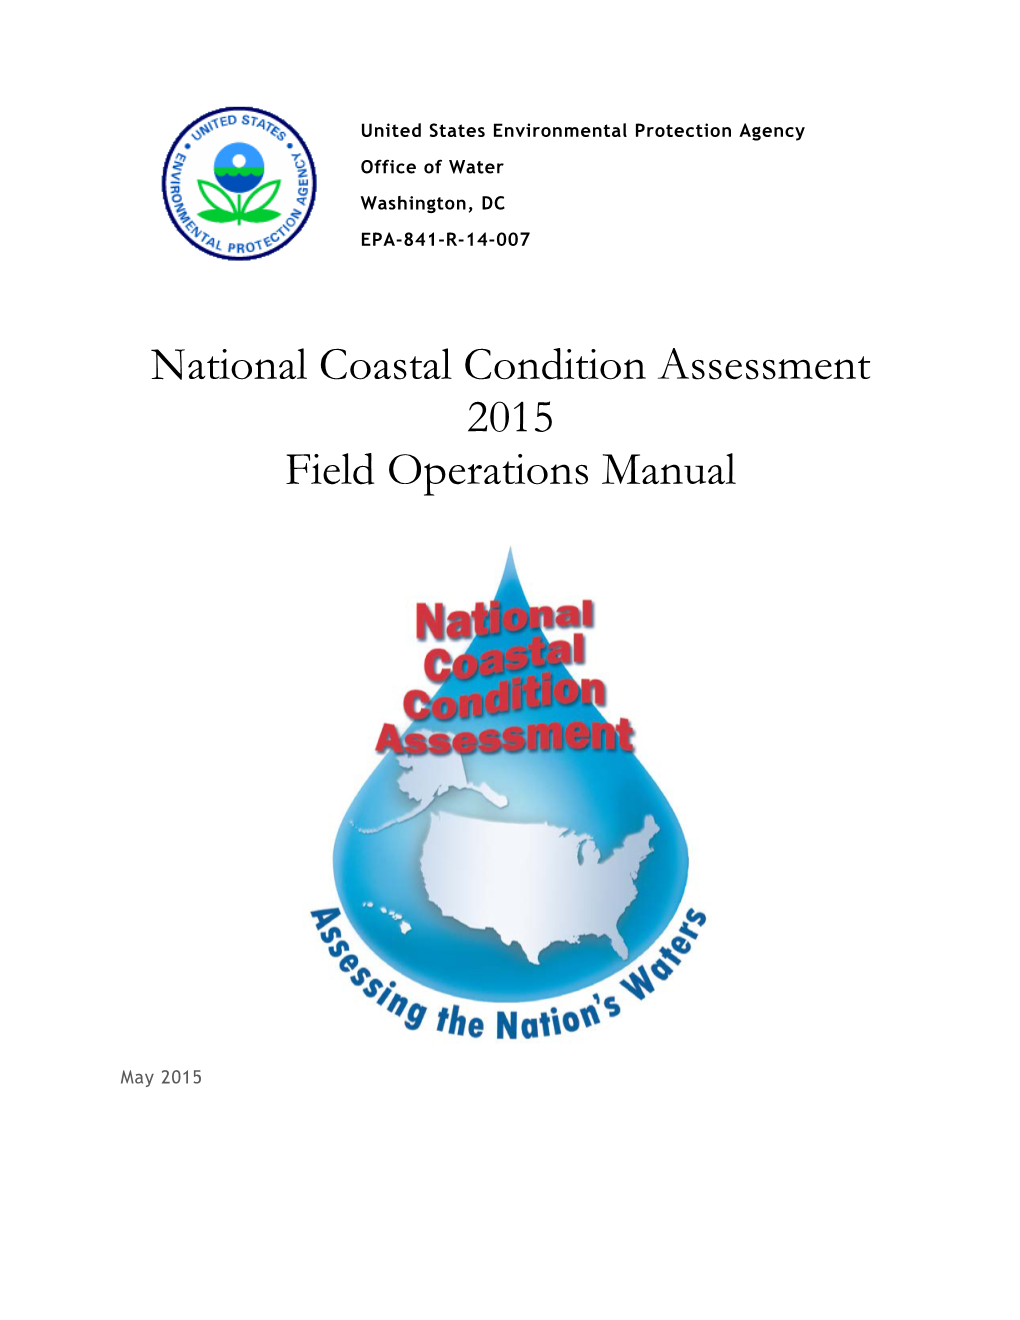 National Coastal Condition Assessment 2015 Field Operations Manual